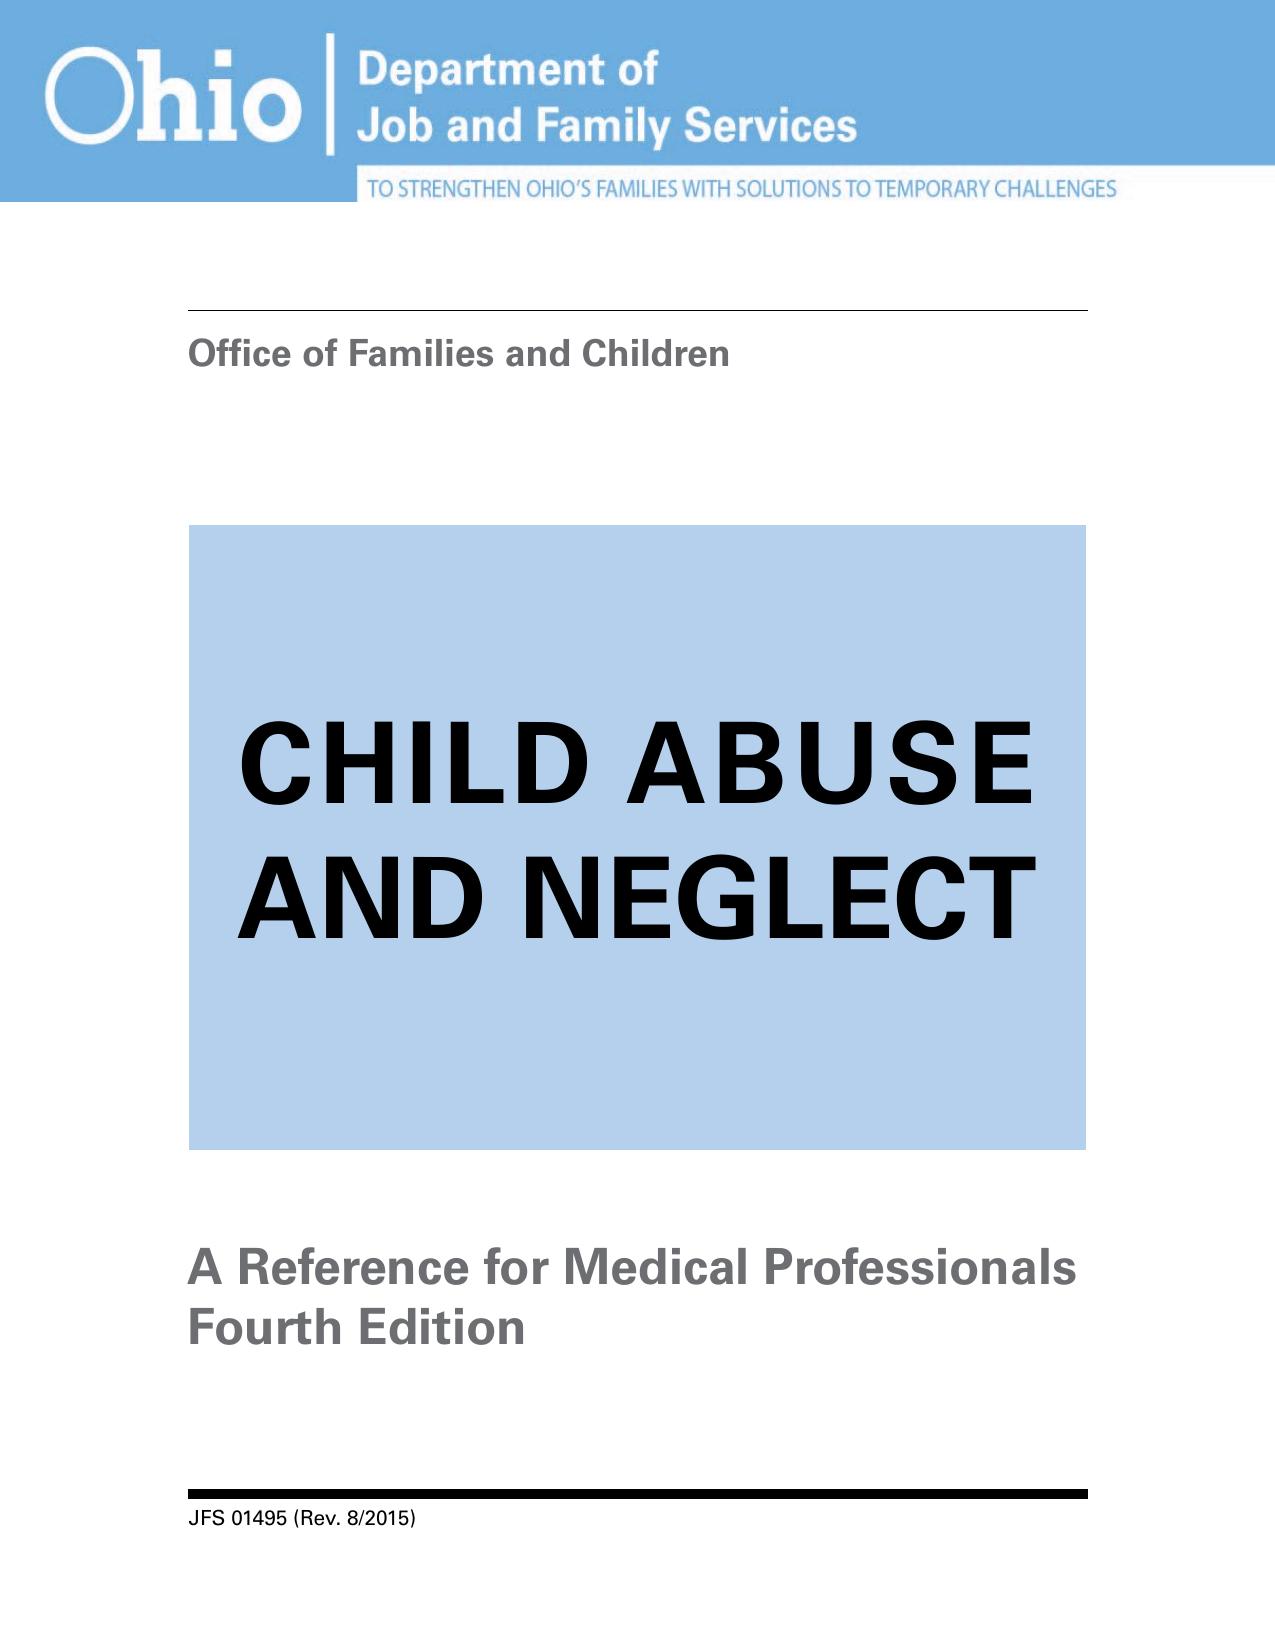 Child abuse and neglect 2015